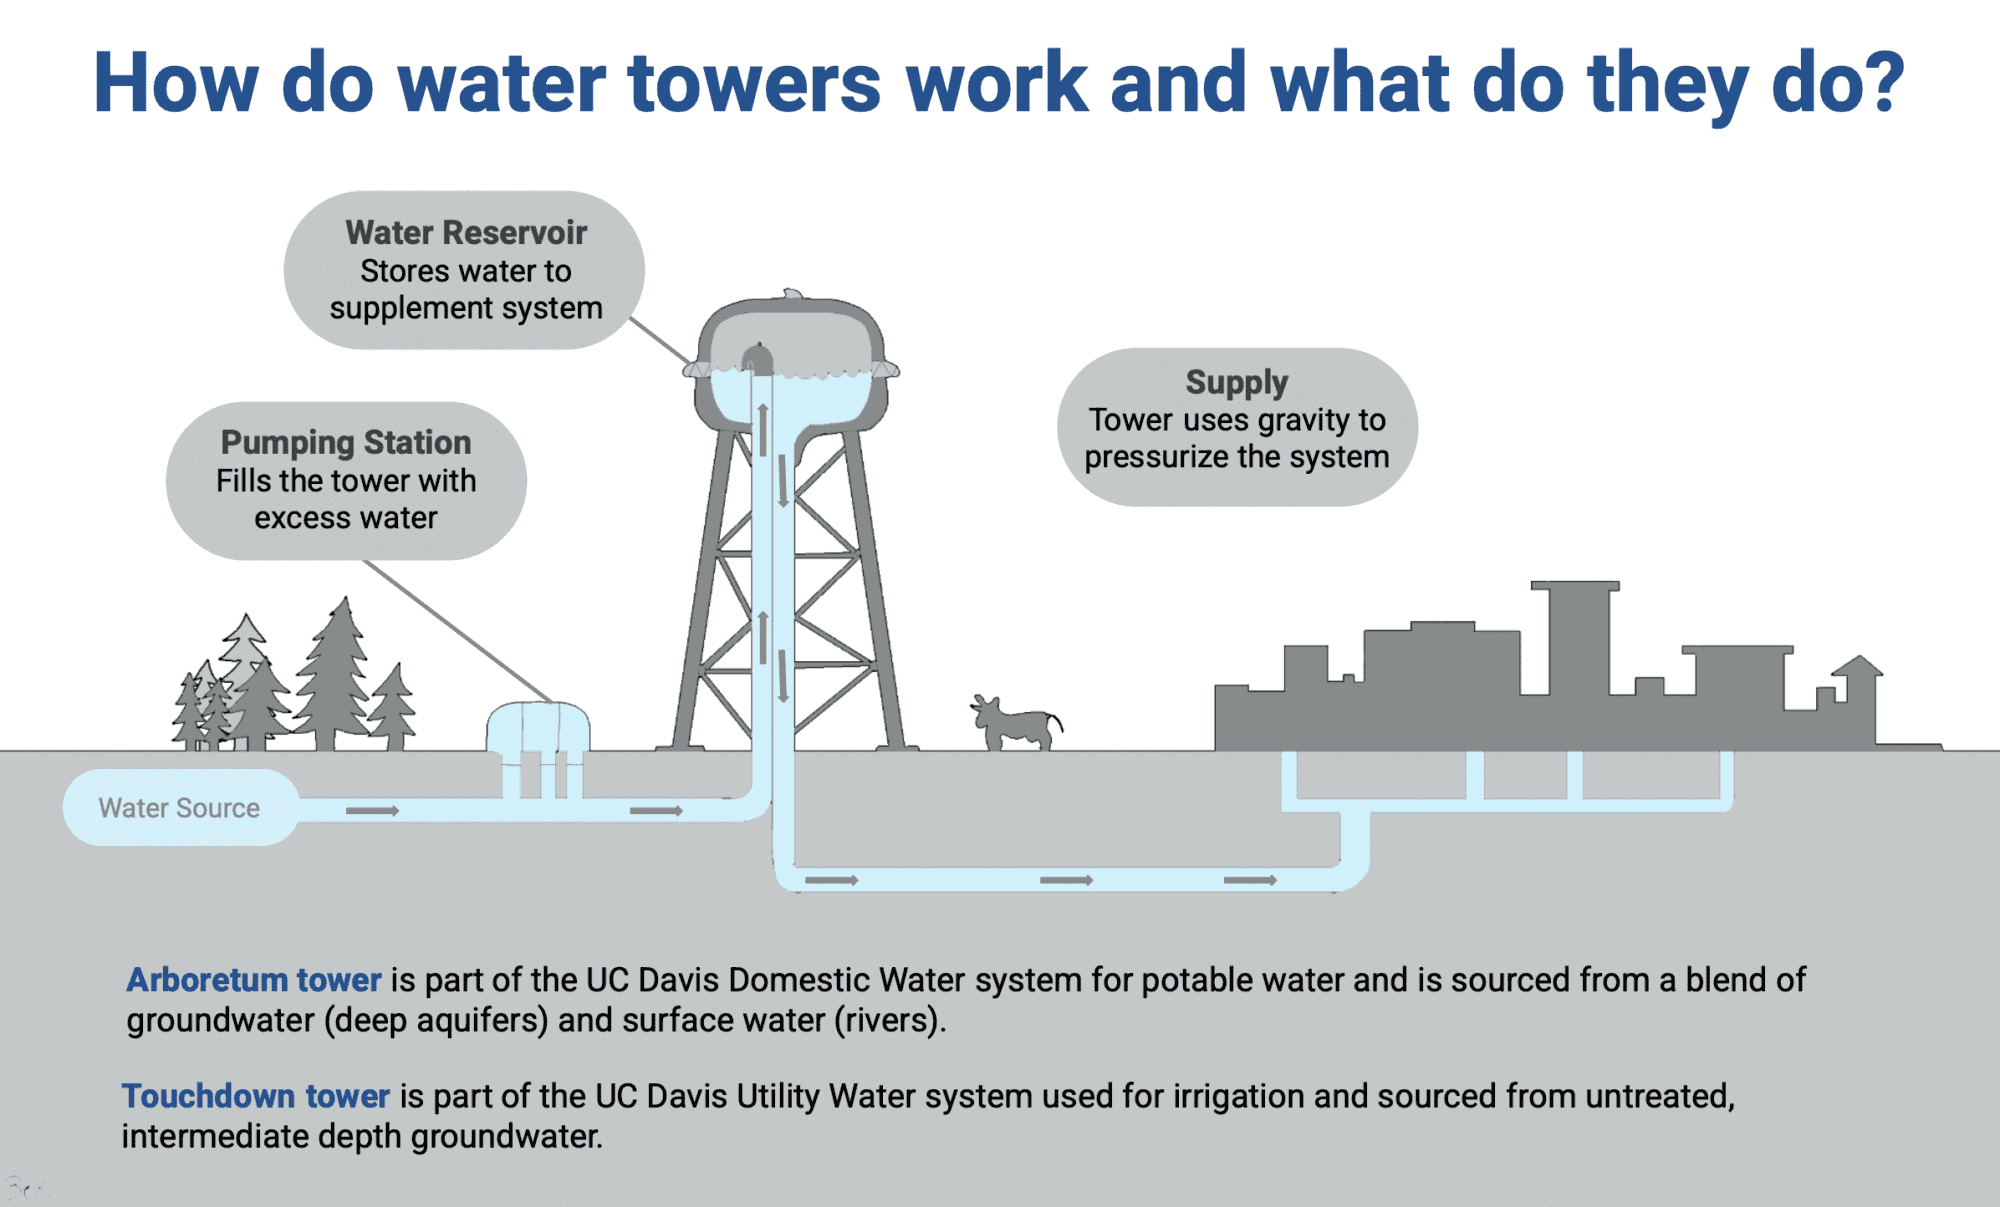 Infographic showing how water towers work